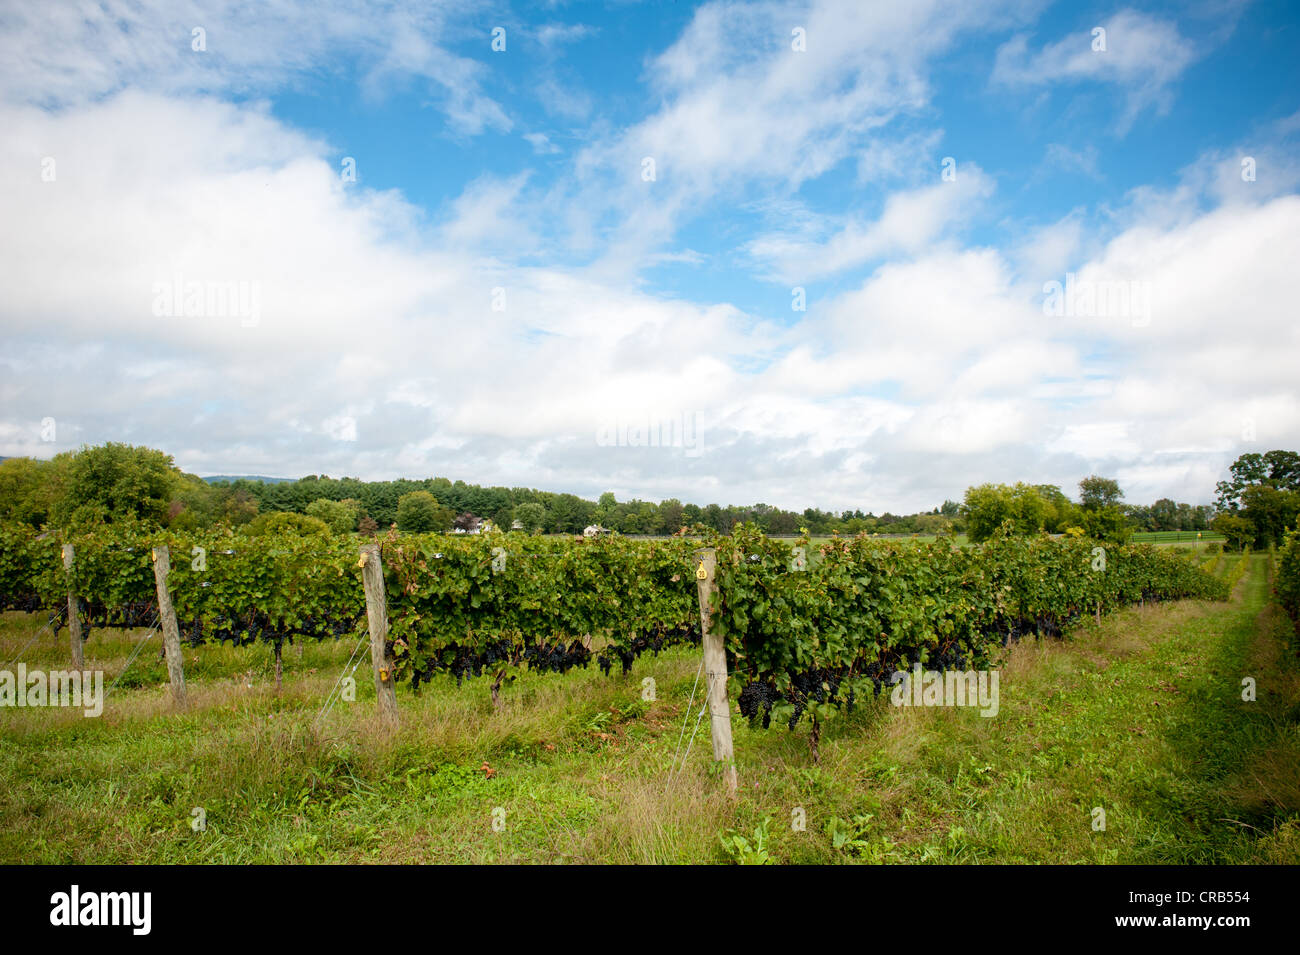 Rows of grapes on a vineyard Stock Photo